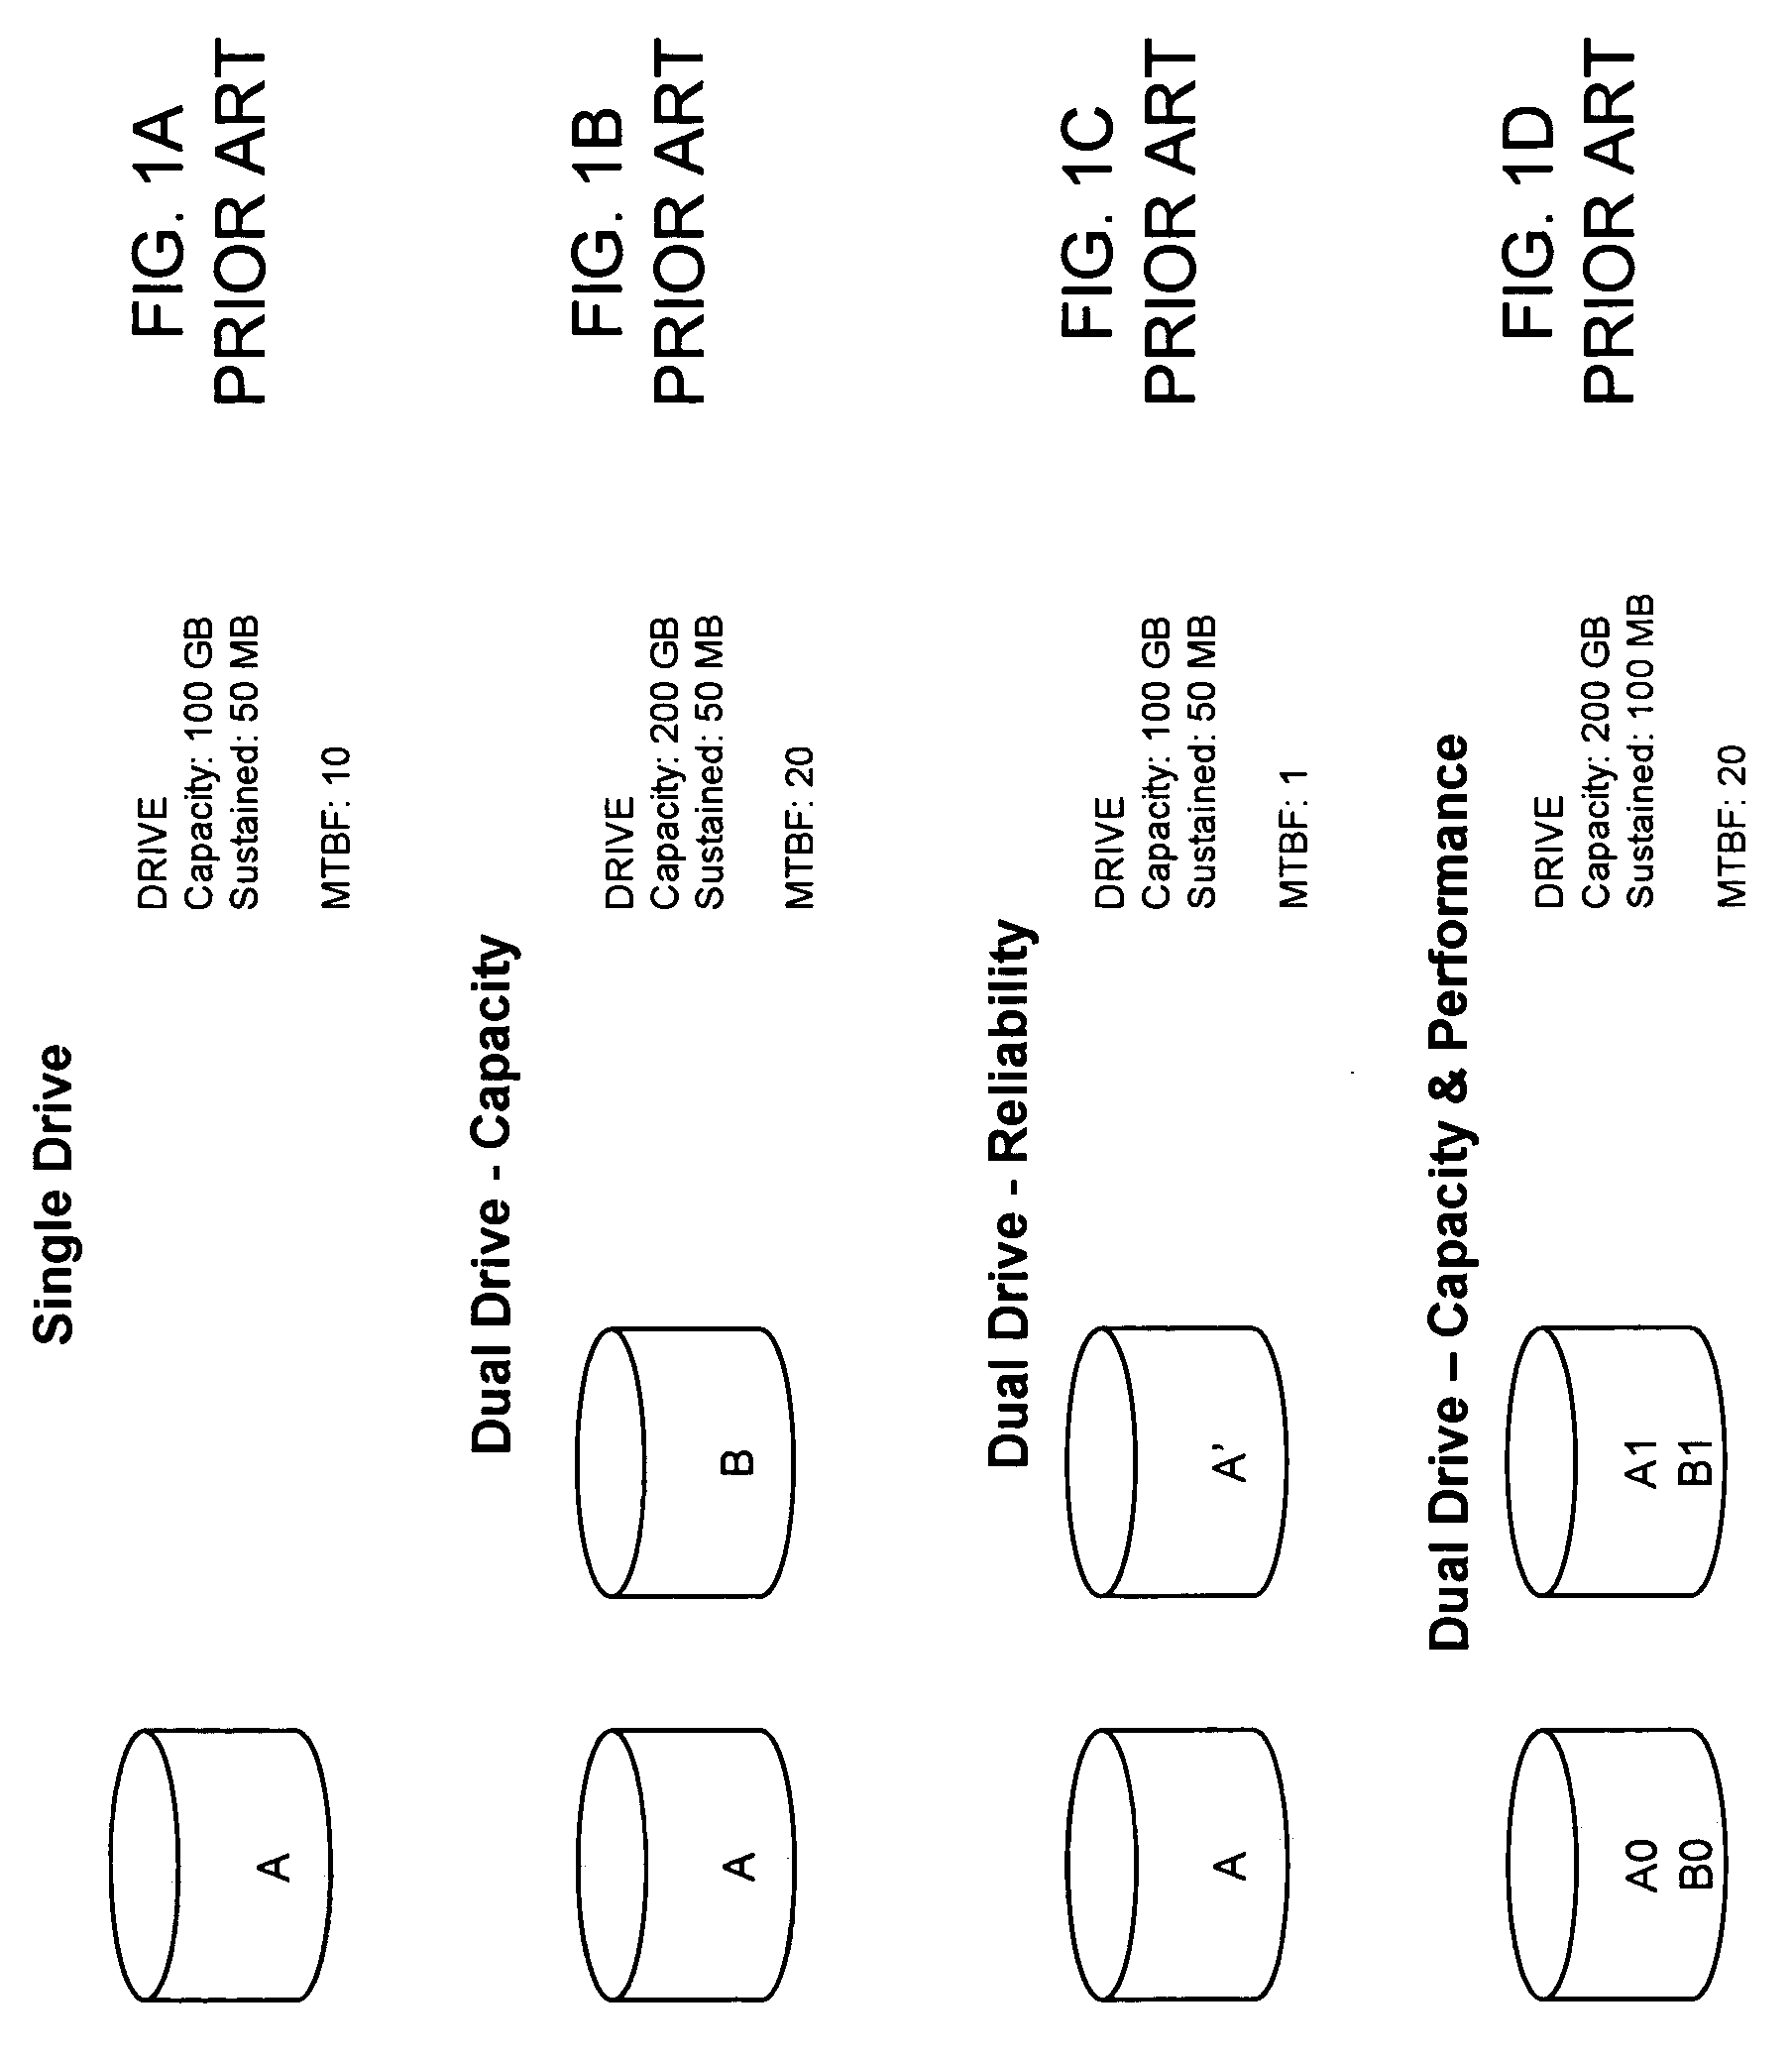 Disk controller methods and apparatus with improved striping, redundancy operations and interfaces